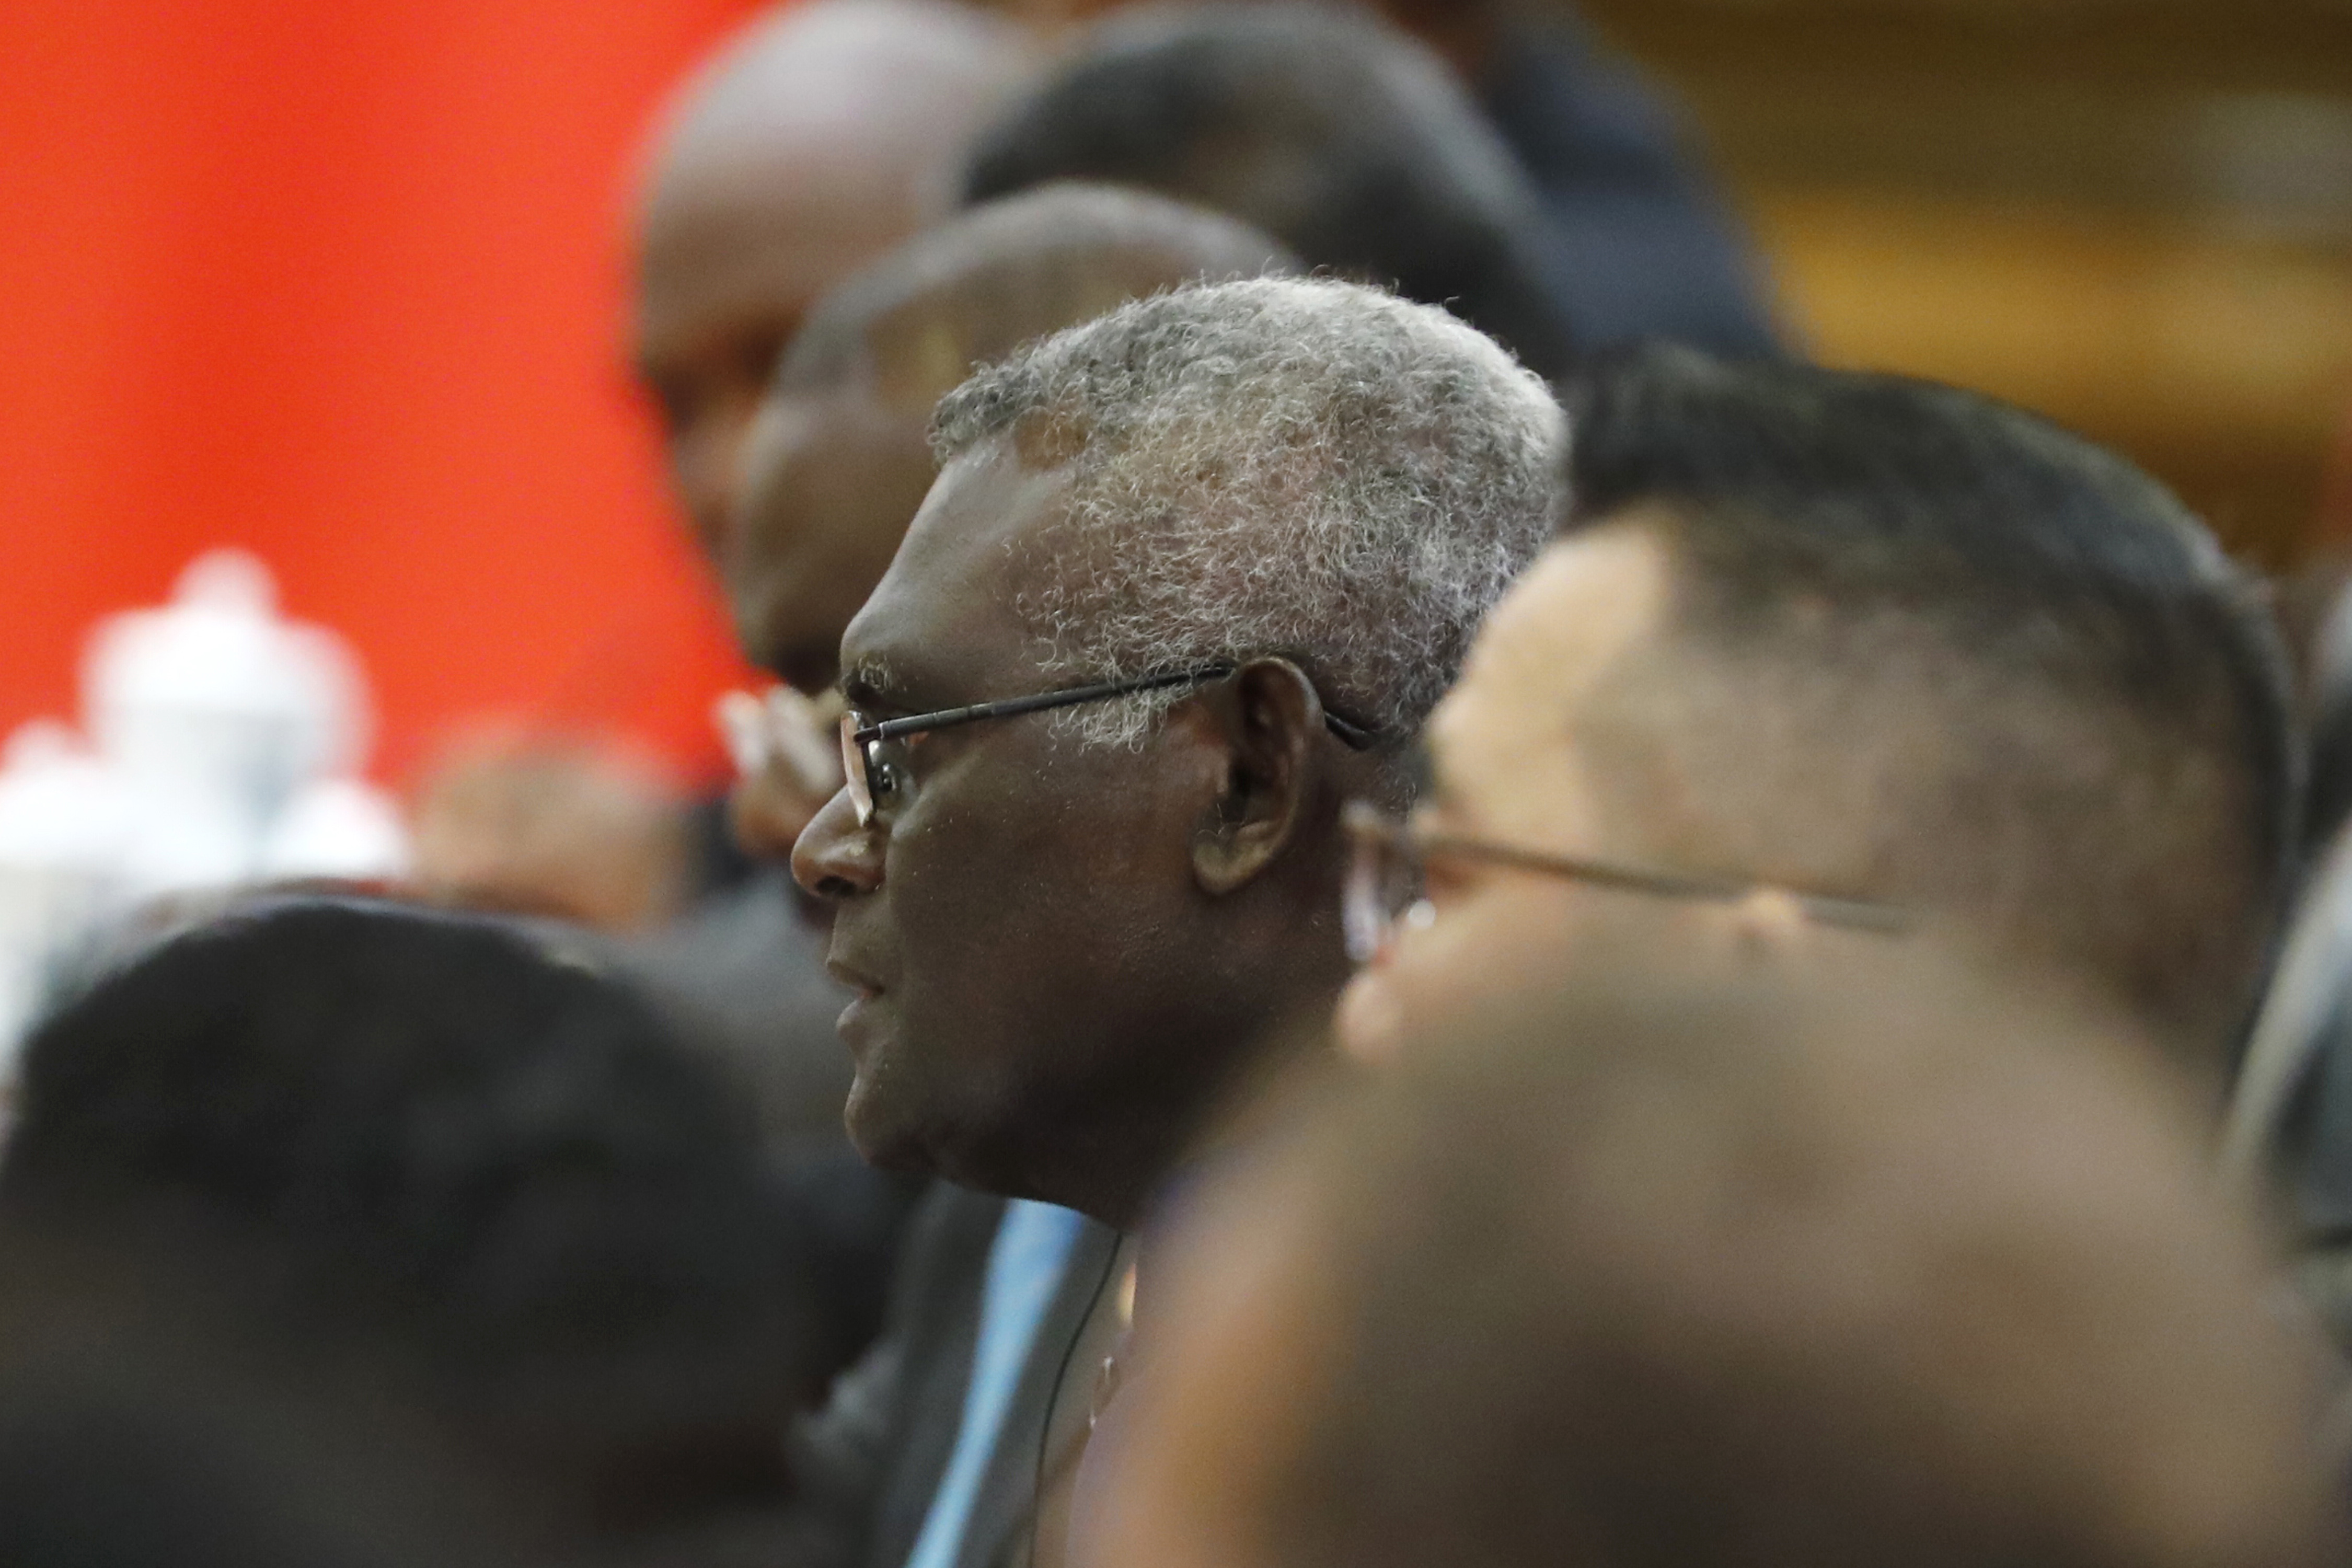 Solomon Islands Prime Minister Manasseh Sogavare during a 2019 visit to Beijing following a shift of diplomatic recognition to the People’s Republic of China (Thomas Peter via AFP/Getty Images)